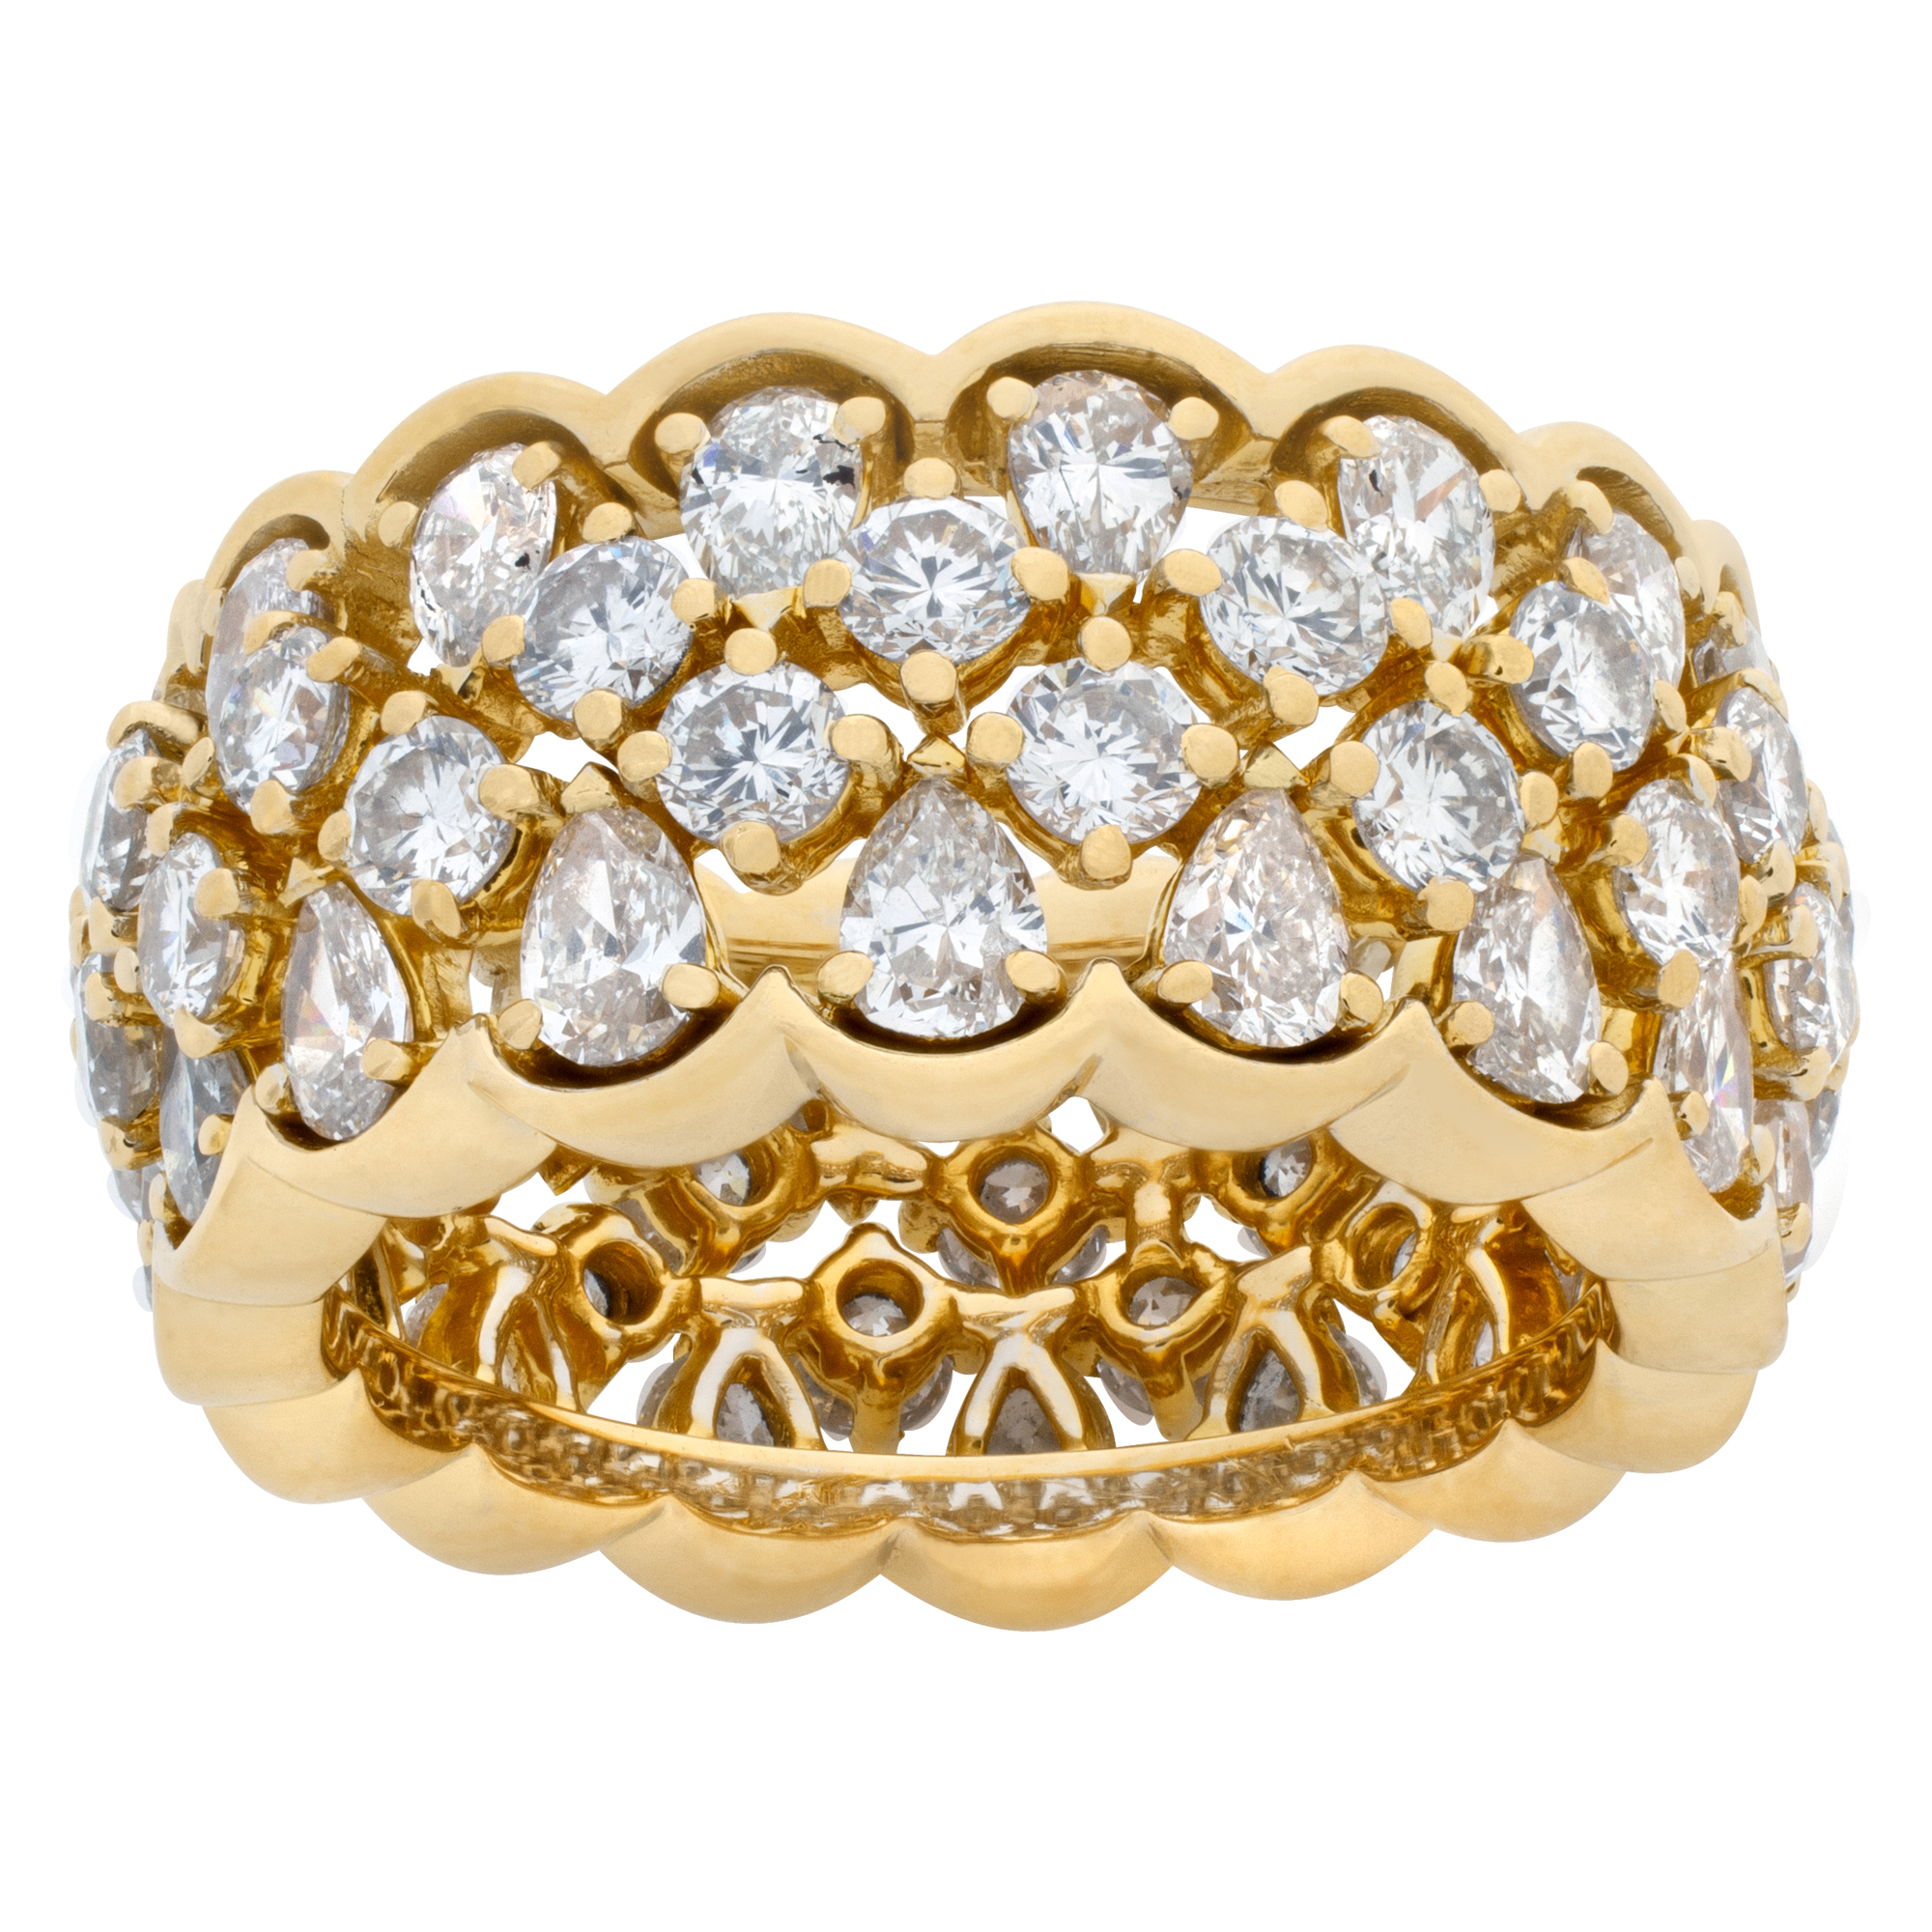 Wide "Eternity" band with approximately 5 carats full cut round brilliant & pear shape diamonds, set in 18K yellow gold